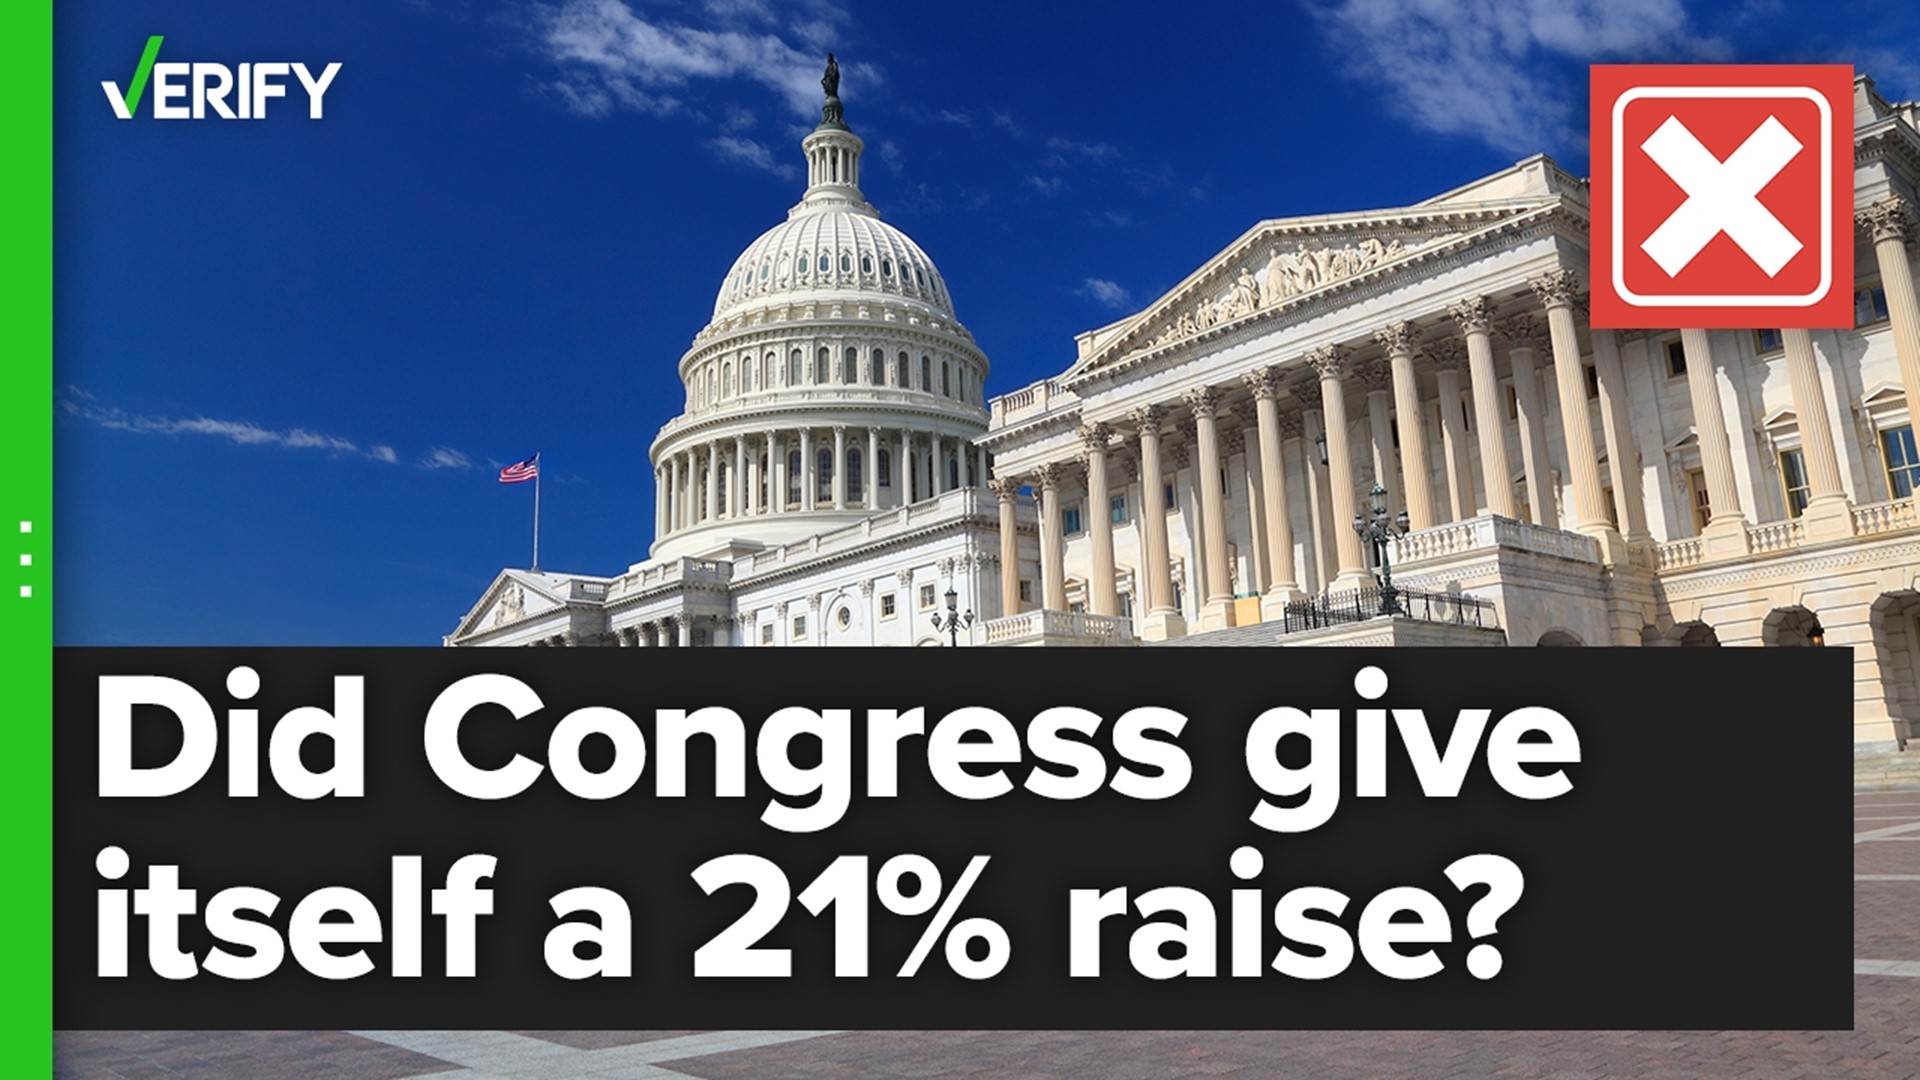 Social media posts claim that a $1.5 trillion spending bill includes a 21% pay raise for Congress members. But their pay has been frozen since 2009.